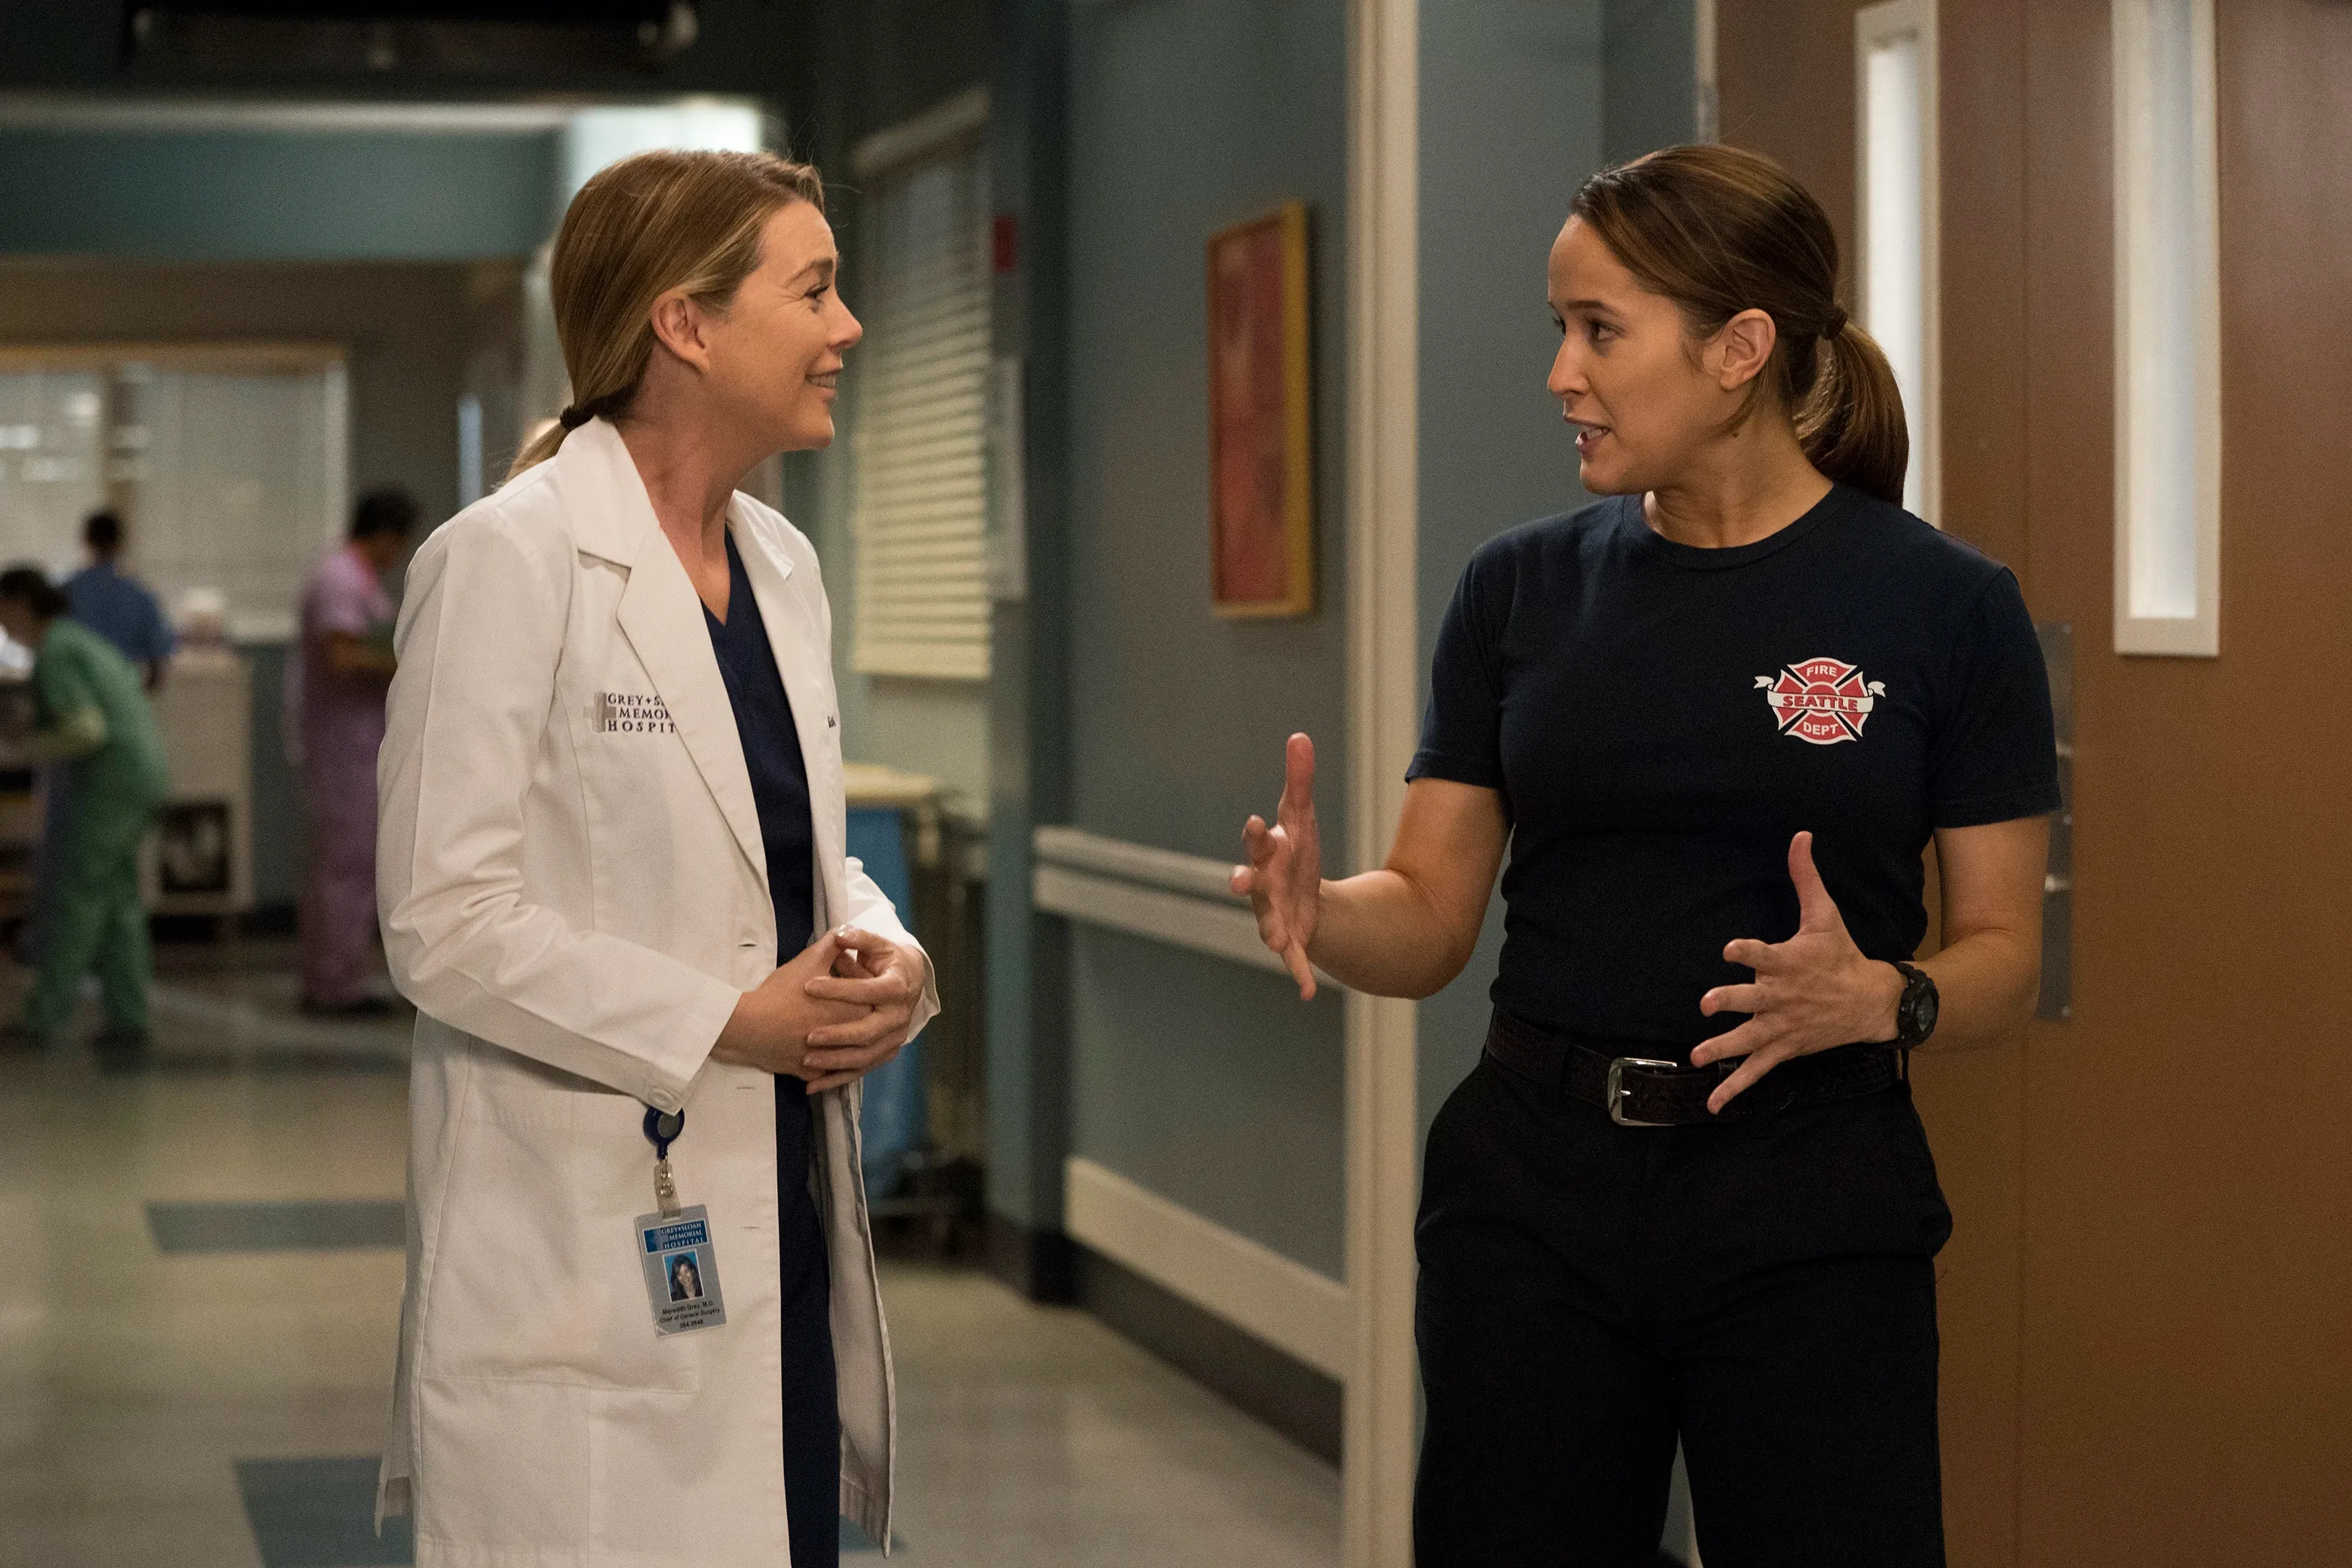 Station 19 Season 6: Release Date, Cast, and Everything We Know So Far